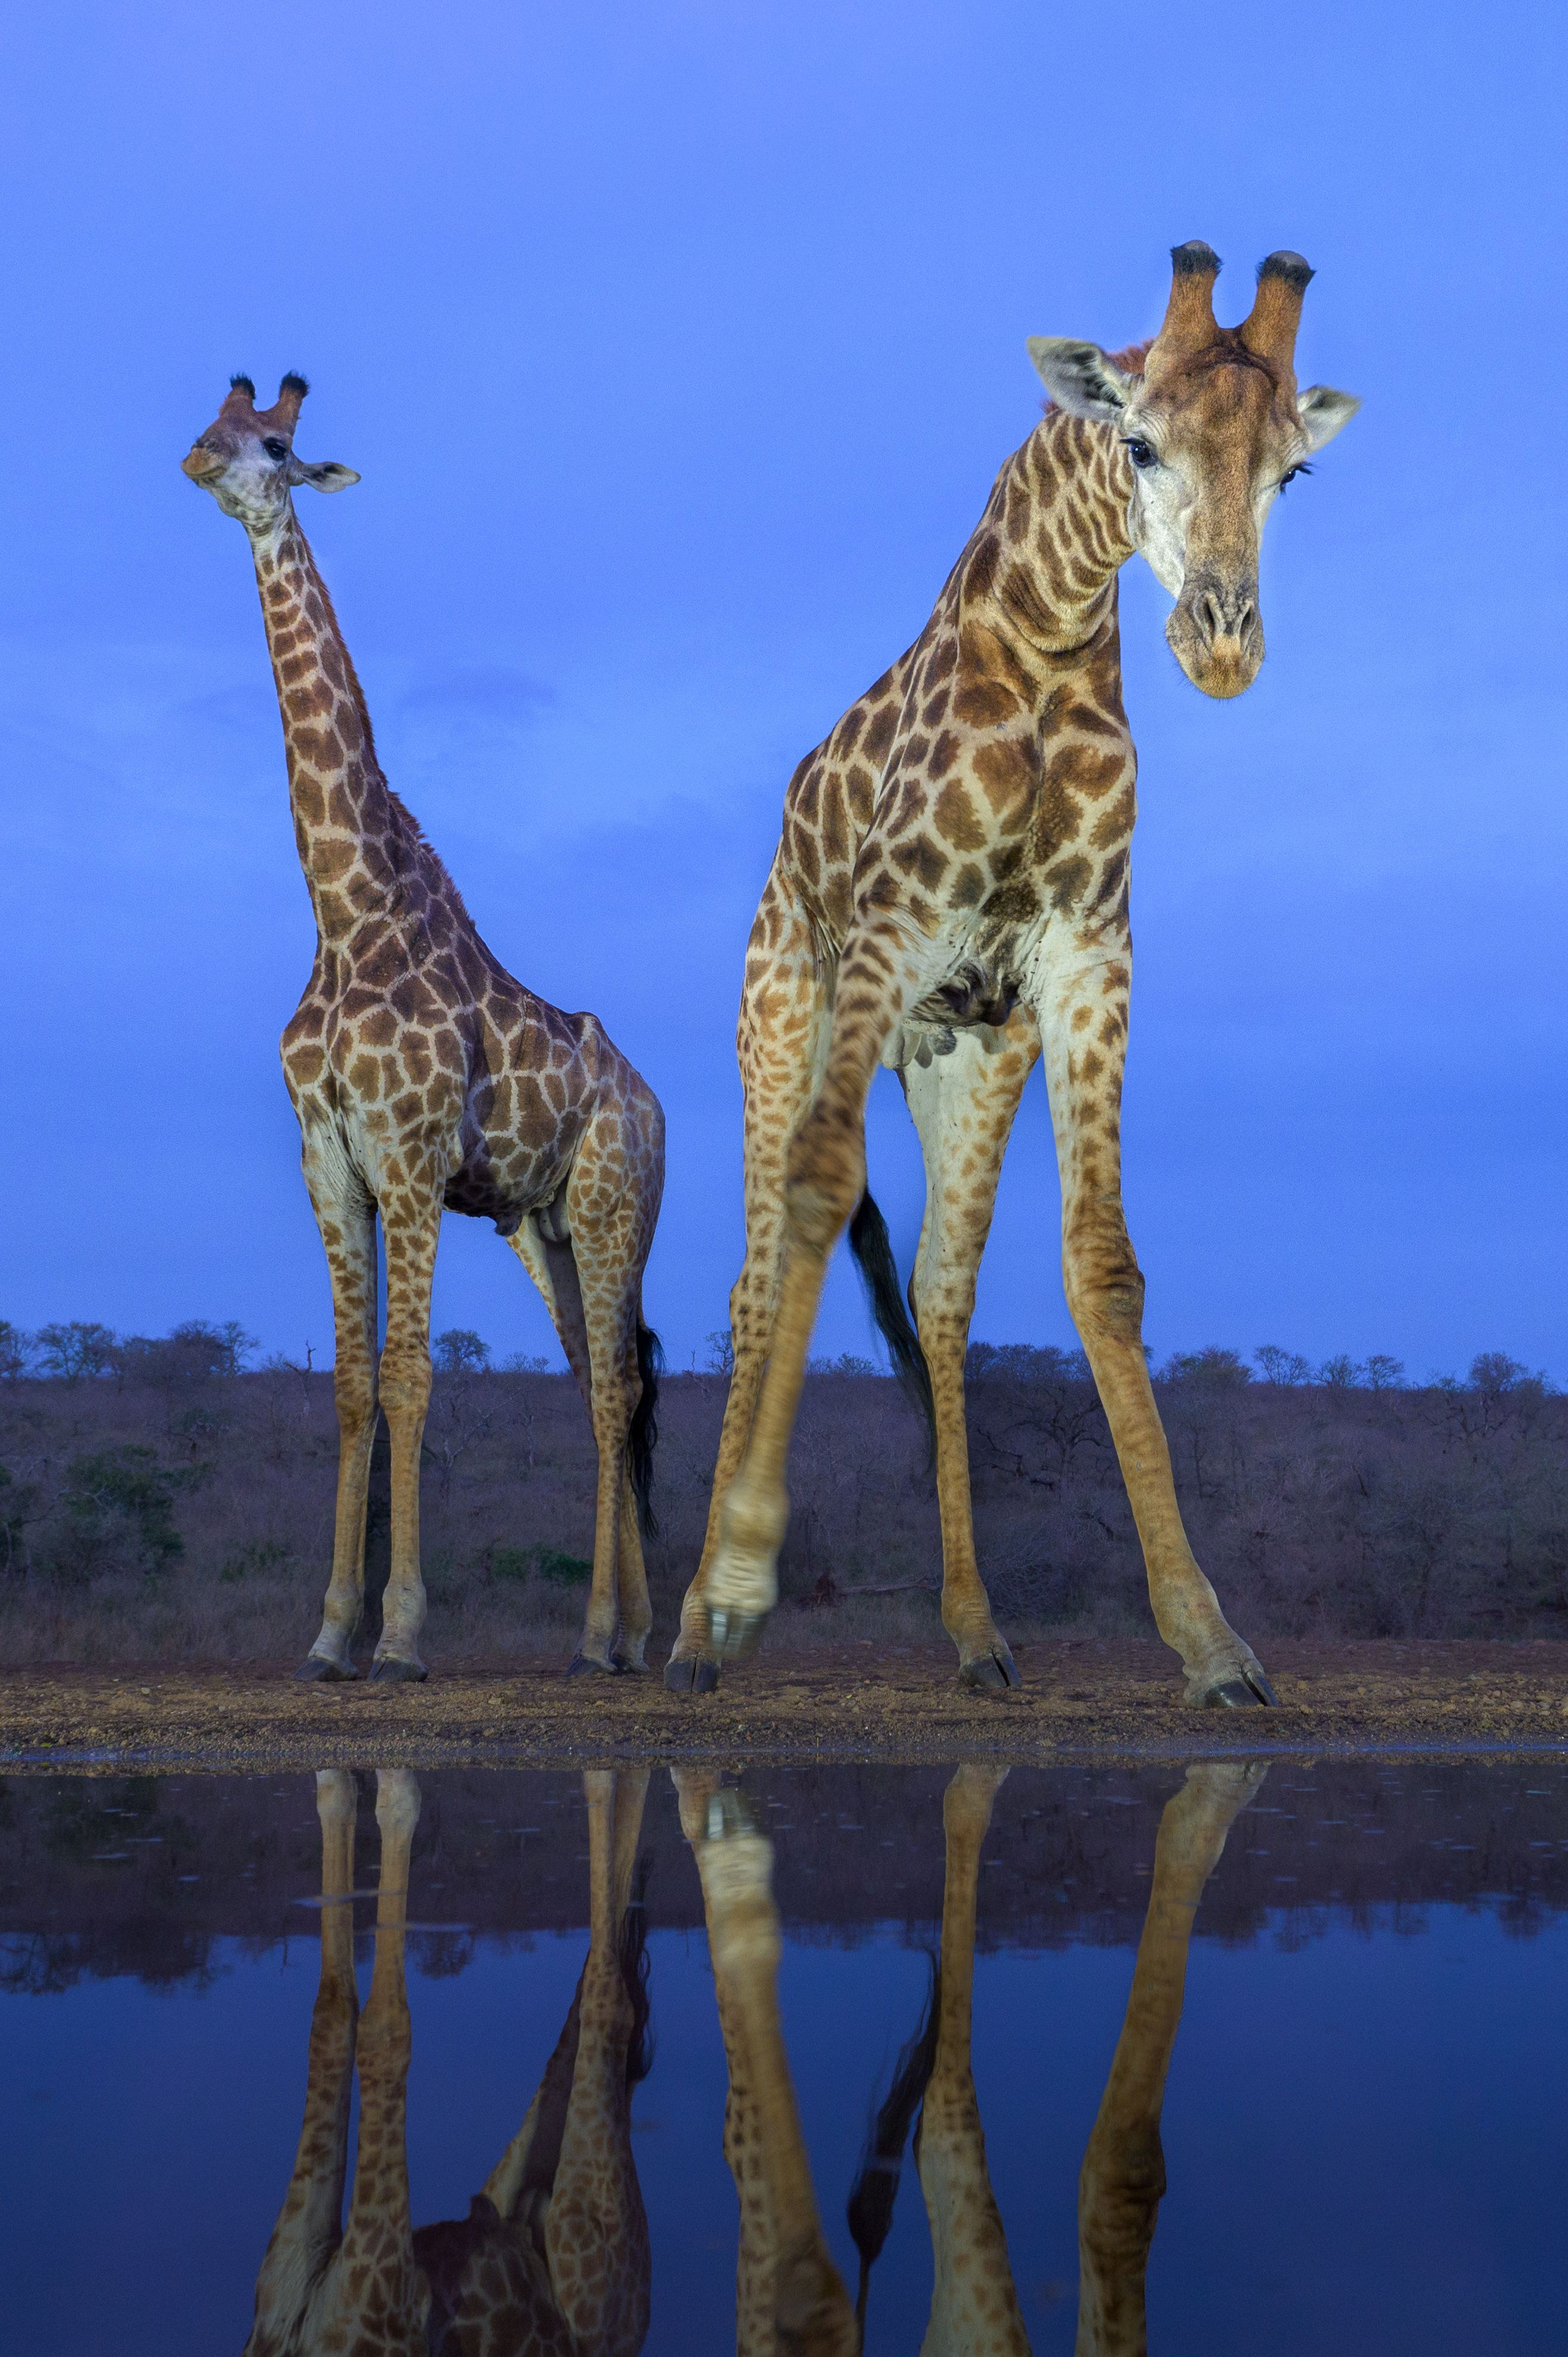 An image of two giraffes at the edge of water, looking at their reflections